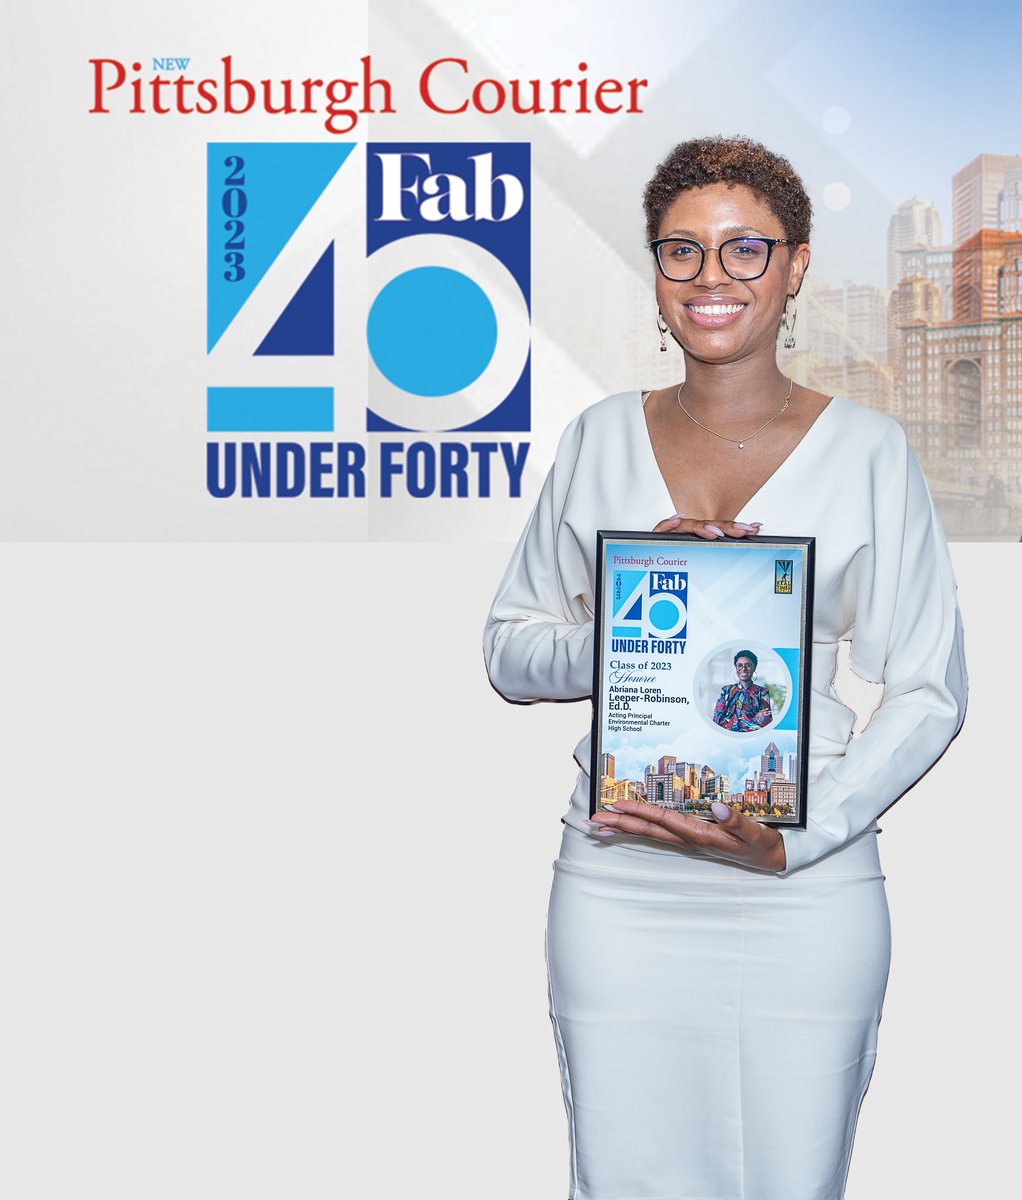 Congratulations to Dr. Abriana Leeper, acting ECHS Principal, for being named to the @NewPghCourier 40 under 40 list. Dr. Leeper received her award with peers and colleagues in attendance on Friday, April 14. #GrowingCitizens